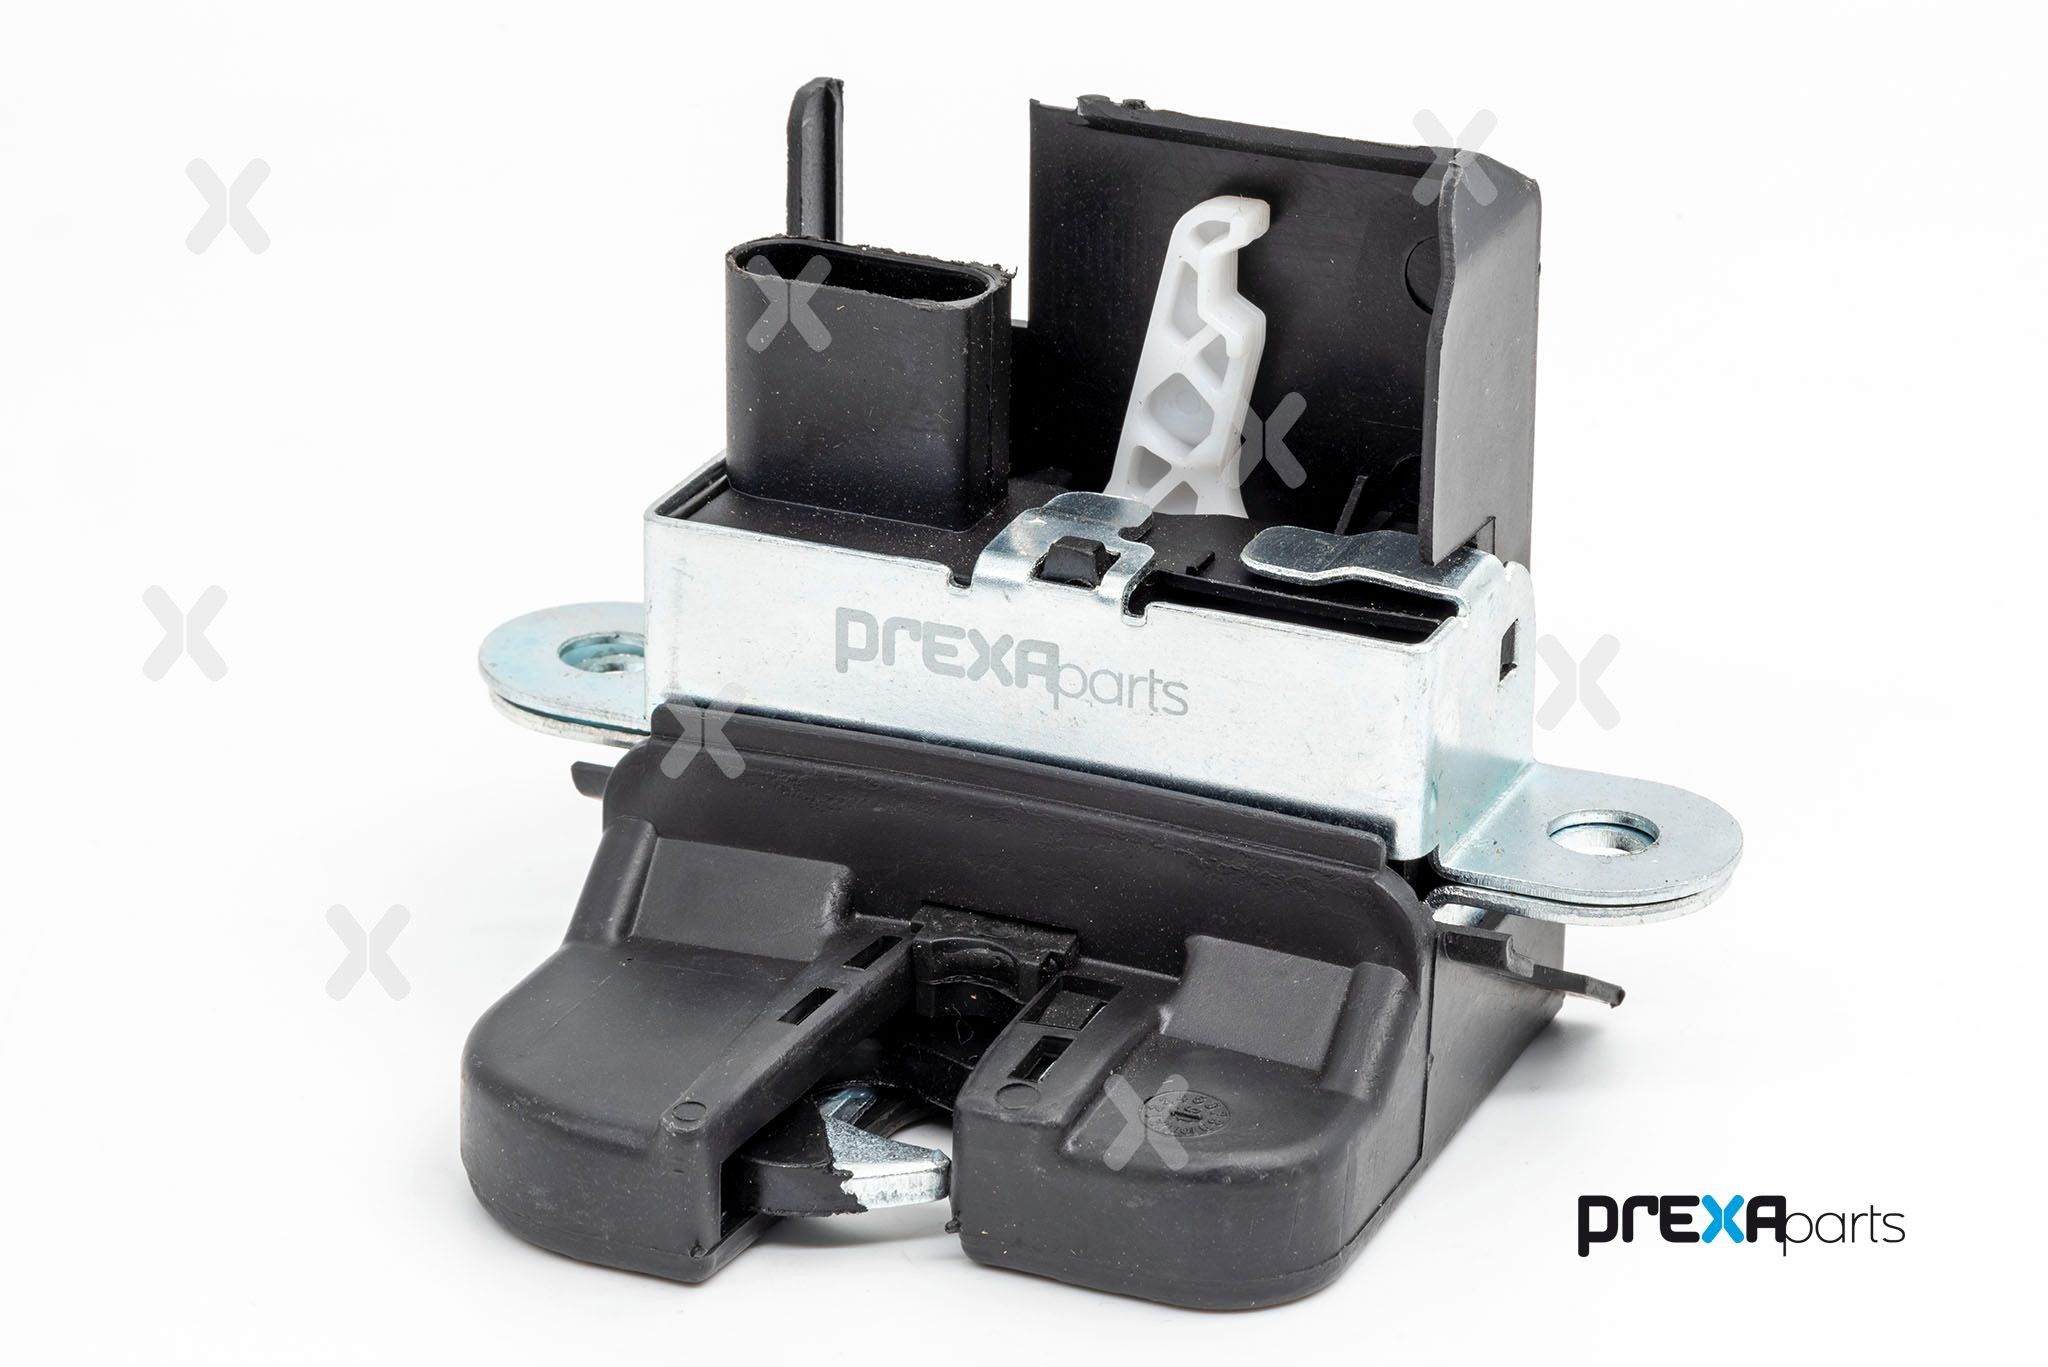 P111006 PREXAparts Tailgate Lock inner ▷ AUTODOC price and review